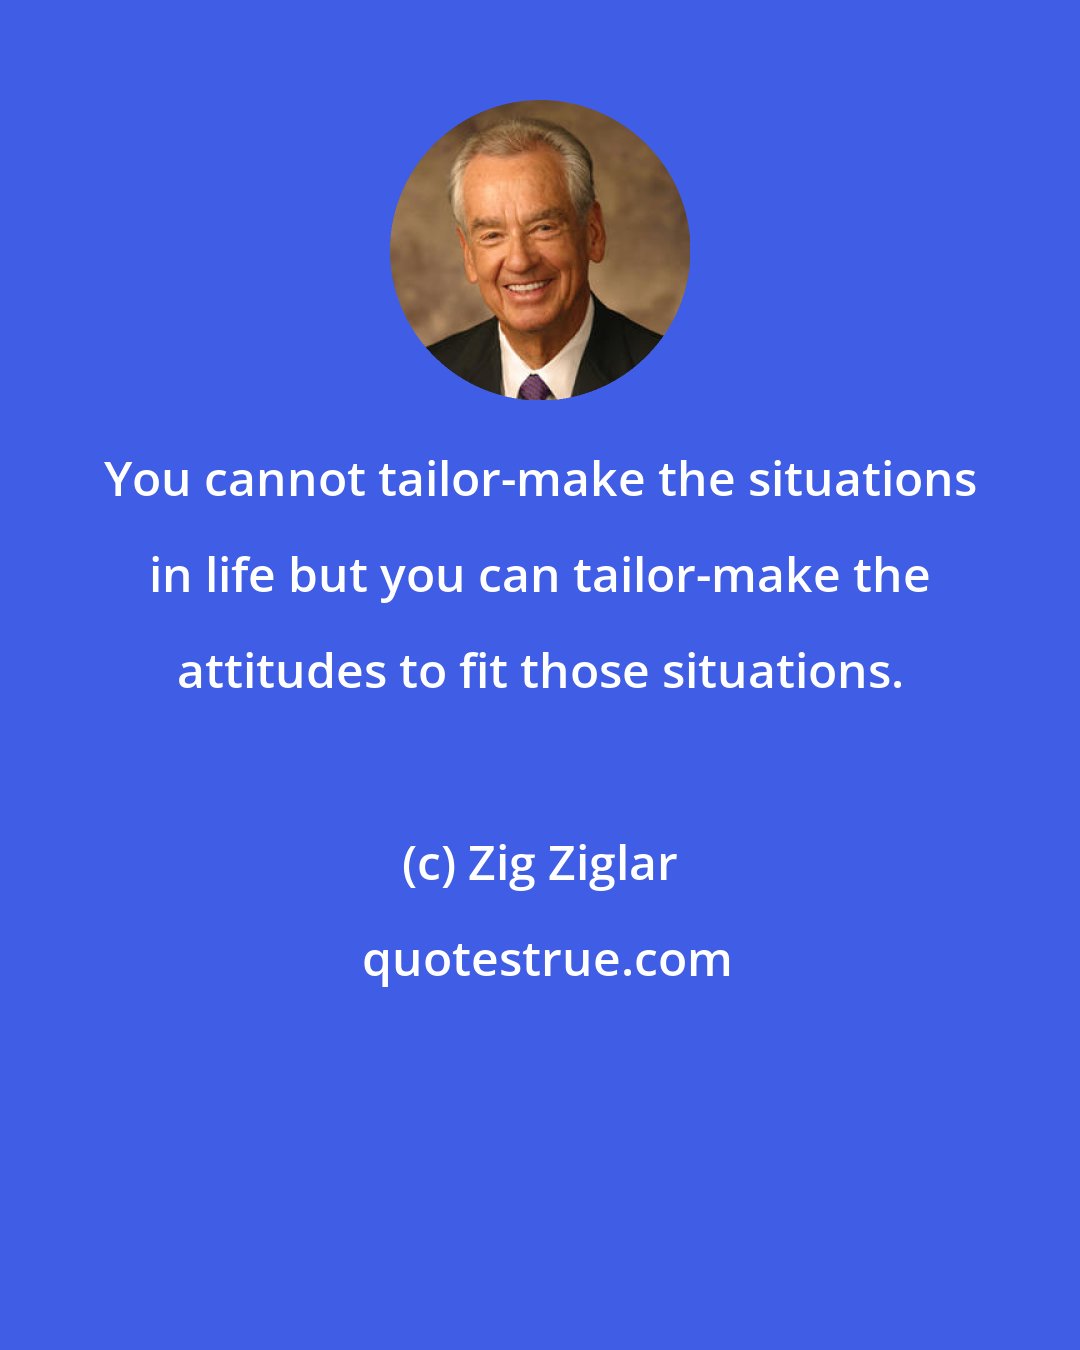 Zig Ziglar: You cannot tailor-make the situations in life but you can tailor-make the attitudes to fit those situations.